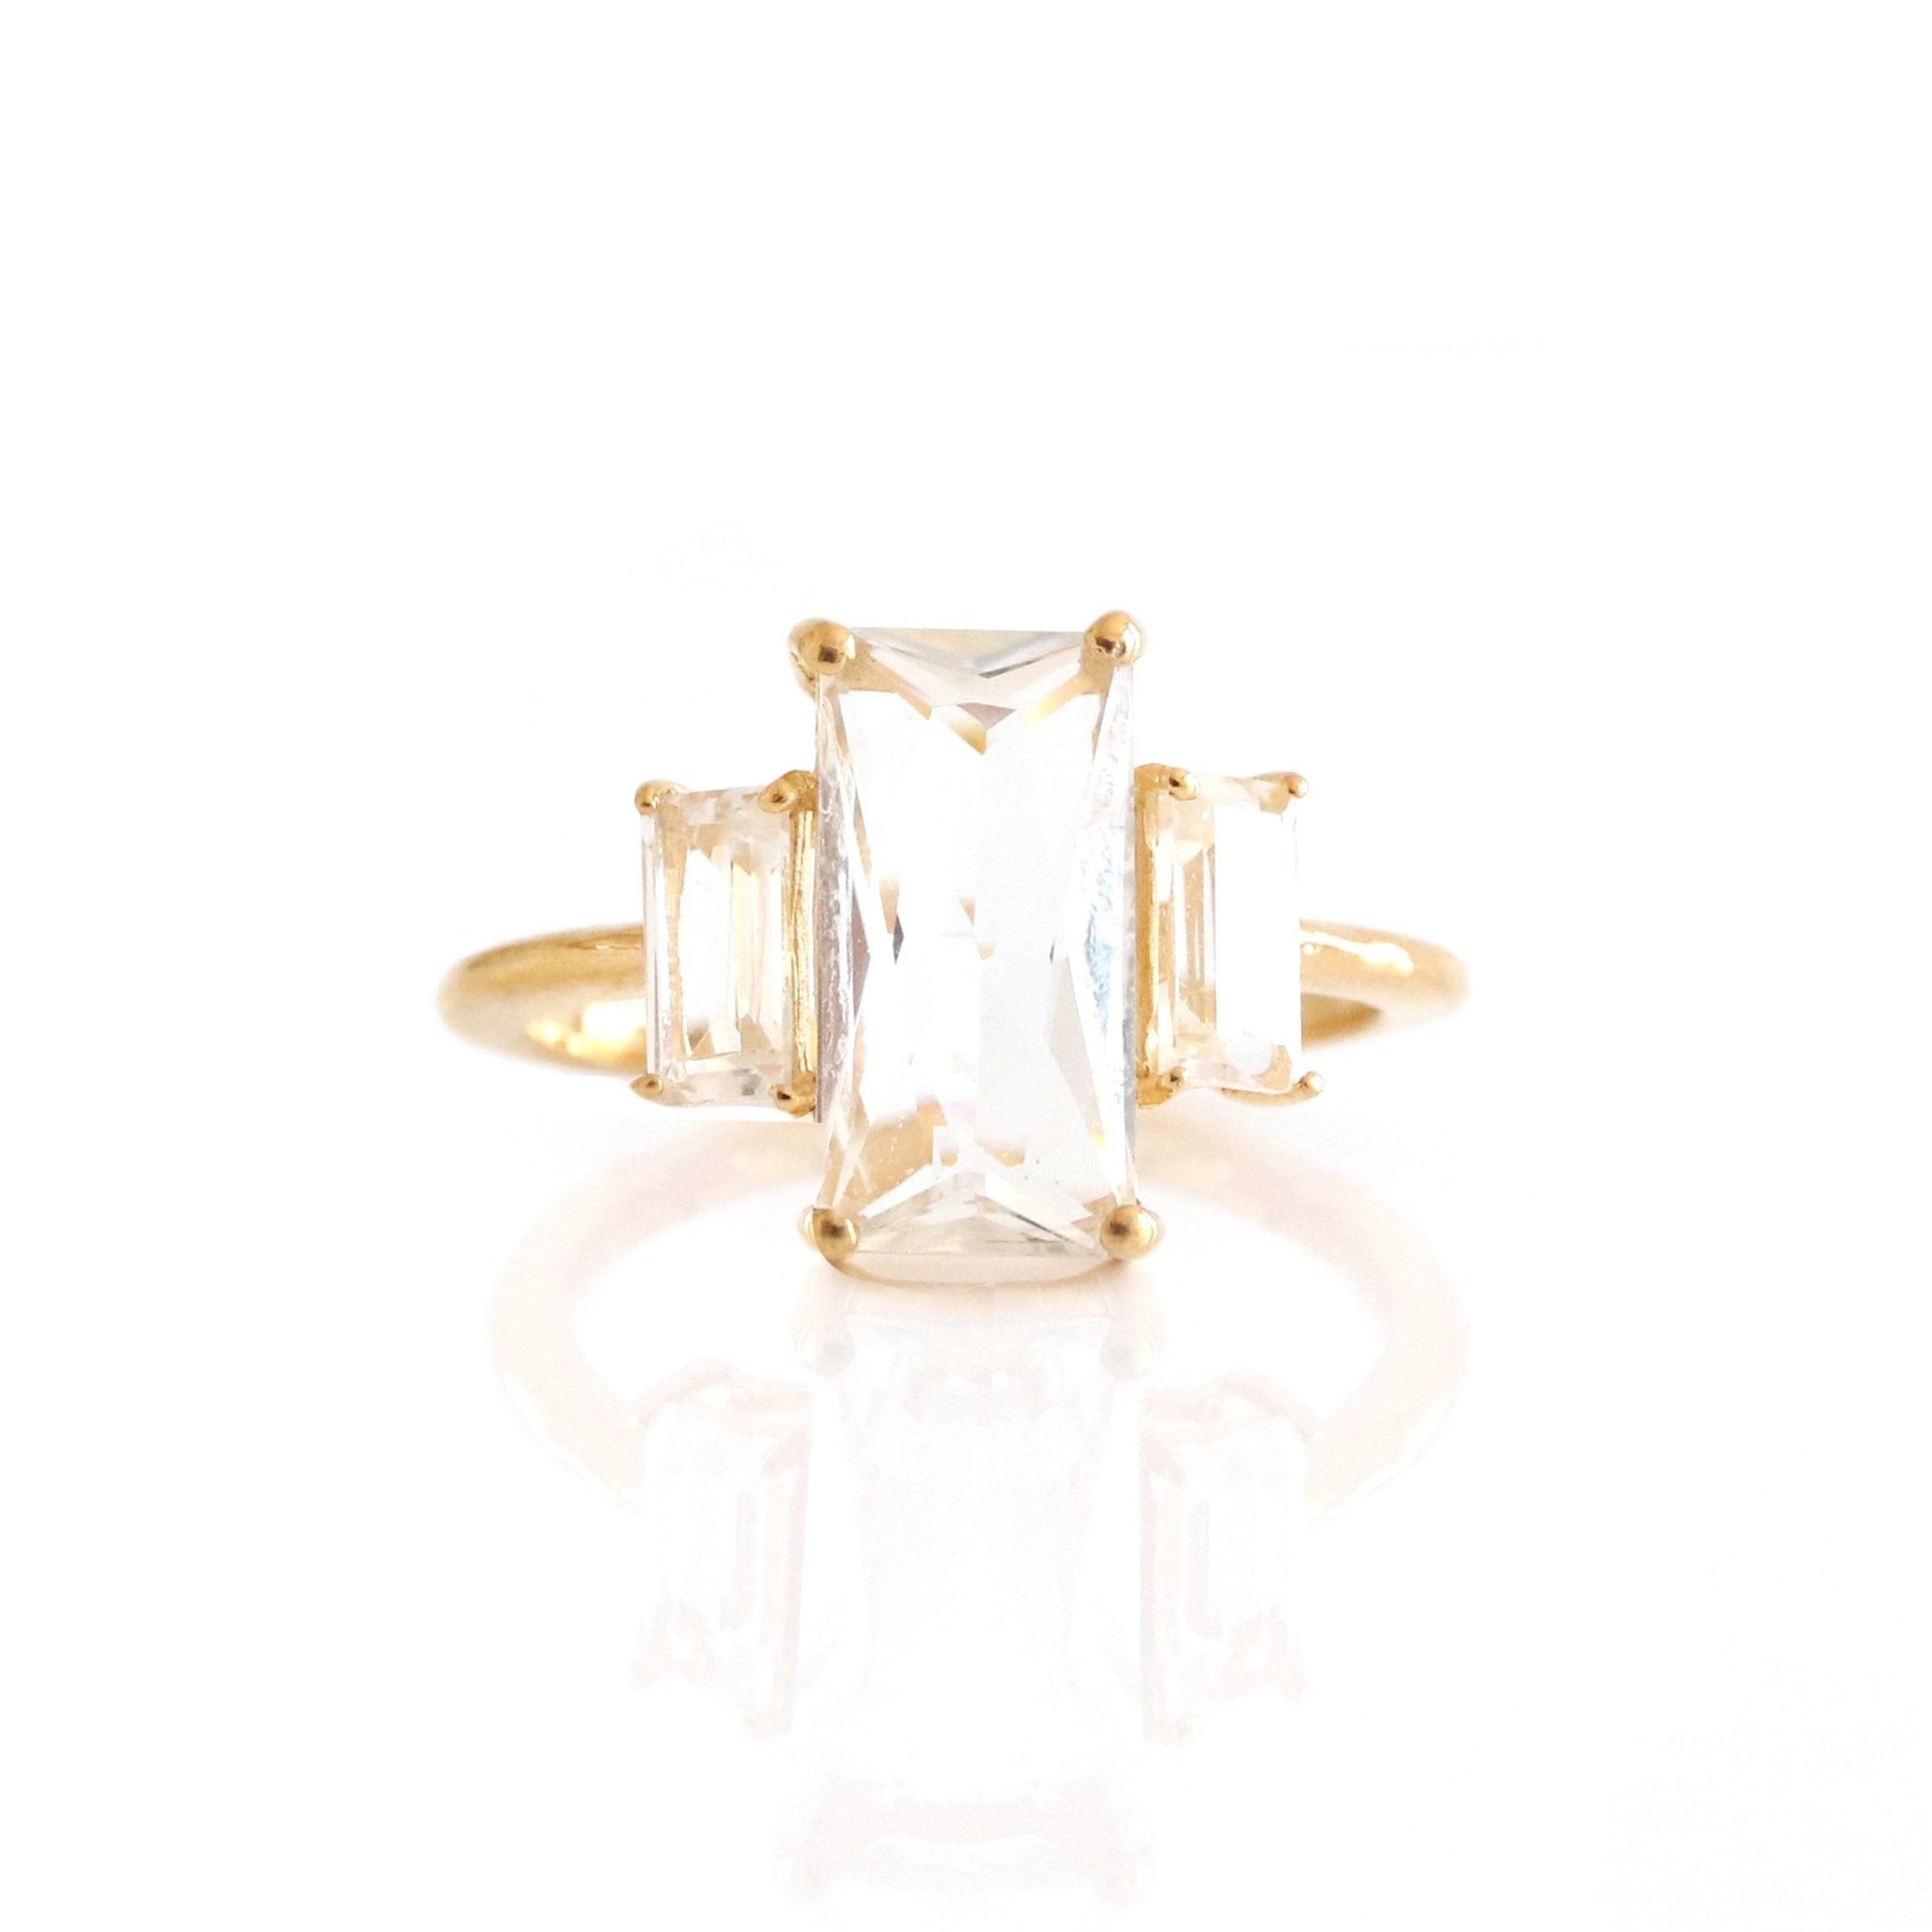 Loyal Cocktail Ring - White Topaz & Gold - SO PRETTY CARA COTTER